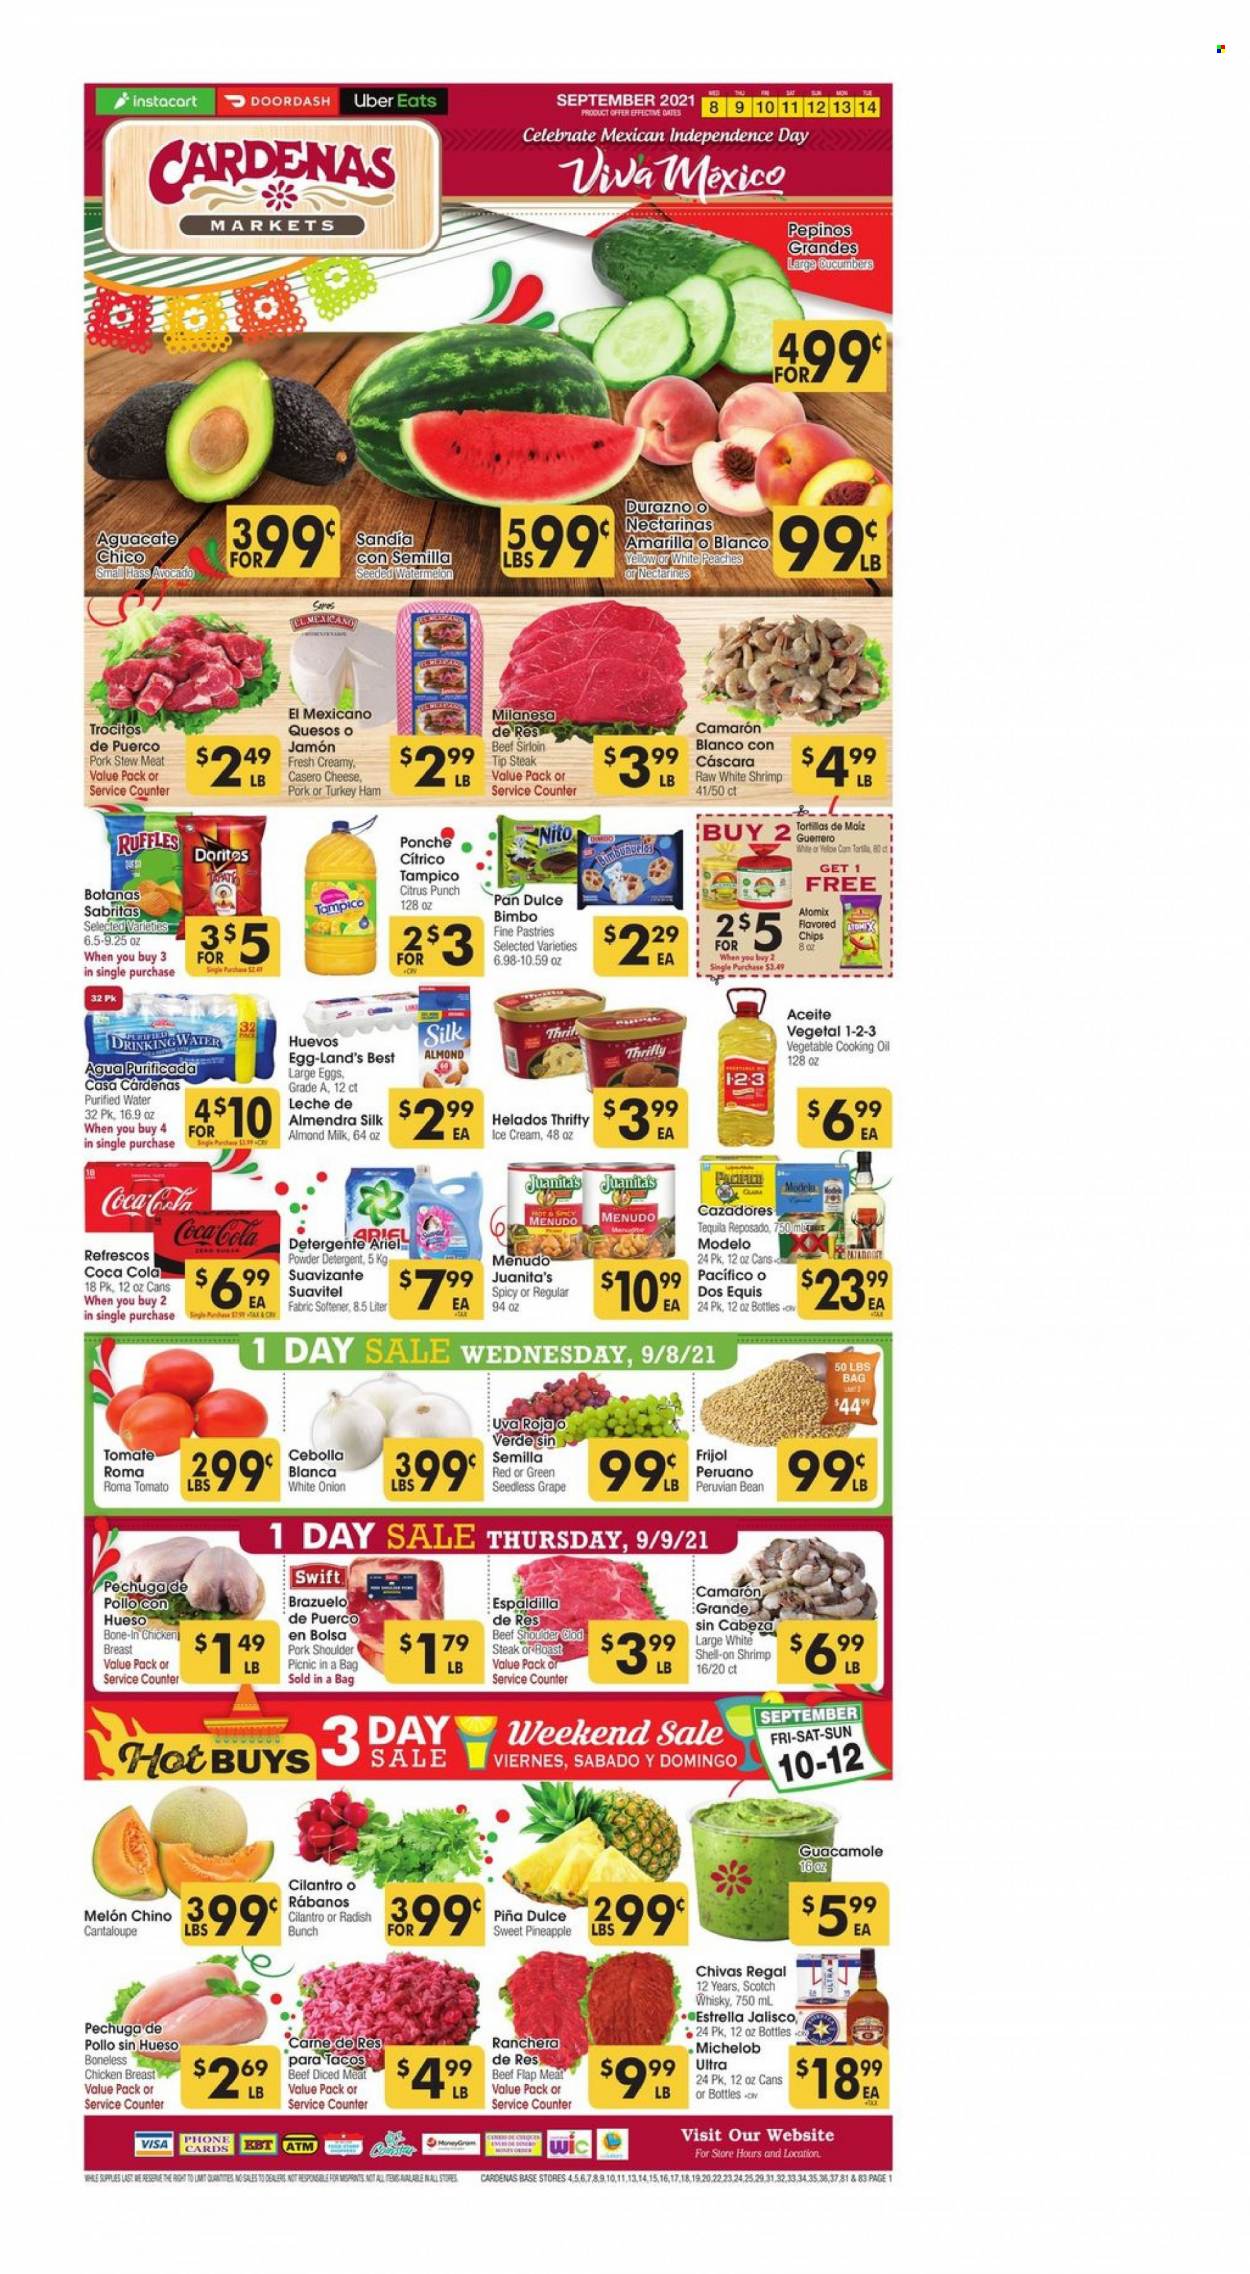 thumbnail - Cardenas Flyer - 09/08/2021 - 09/14/2021 - Sales products - stew meat, cantaloupe, cucumber, radishes, tomatoes, pineapple, shrimps, ham, guacamole, cheese, almond milk, large eggs, ice cream, Doritos, chips, Ruffles, cilantro, oil, Coca-Cola, fruit punch, purified water, tequila, Chivas Regal, scotch whisky, whisky, beer, Modelo, chicken breasts, beef meat, beef sirloin, steak, pork meat, pork shoulder, detergent, fabric softener, Ariel, pan, nectarines, melons, Dos Equis, Michelob, peaches. Page 1.